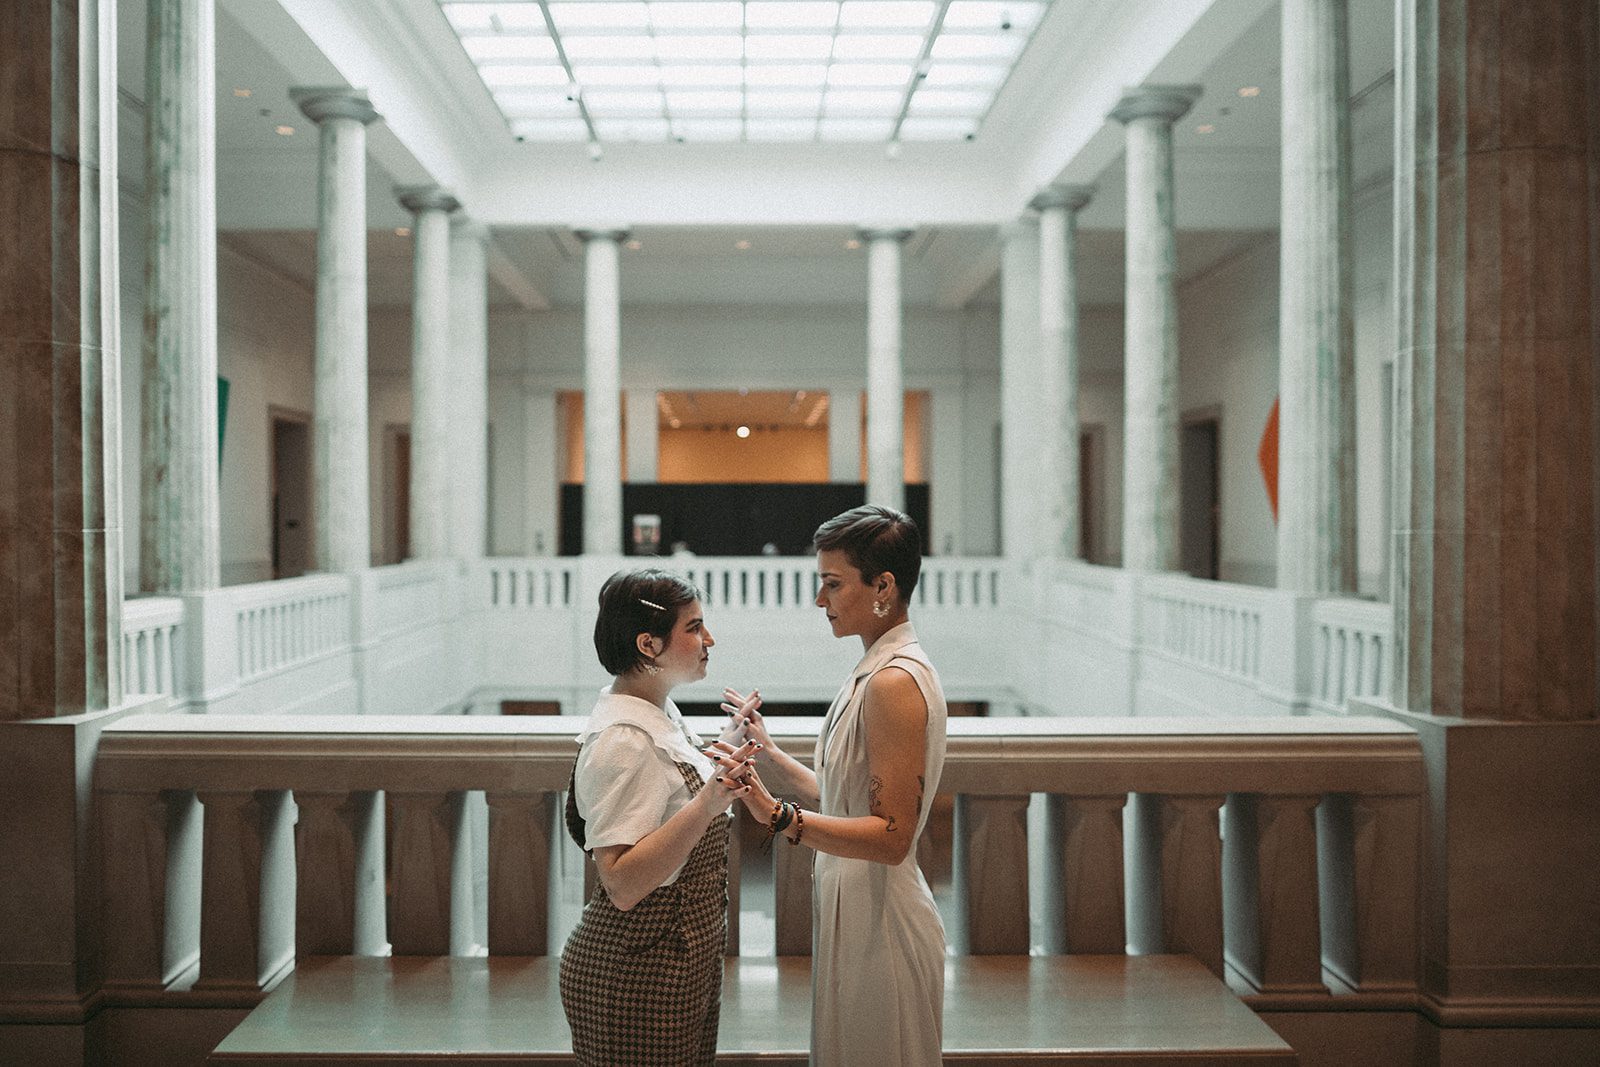 They face each other in front of a grand room of white marble pillars. They connect hands and stare at one another.